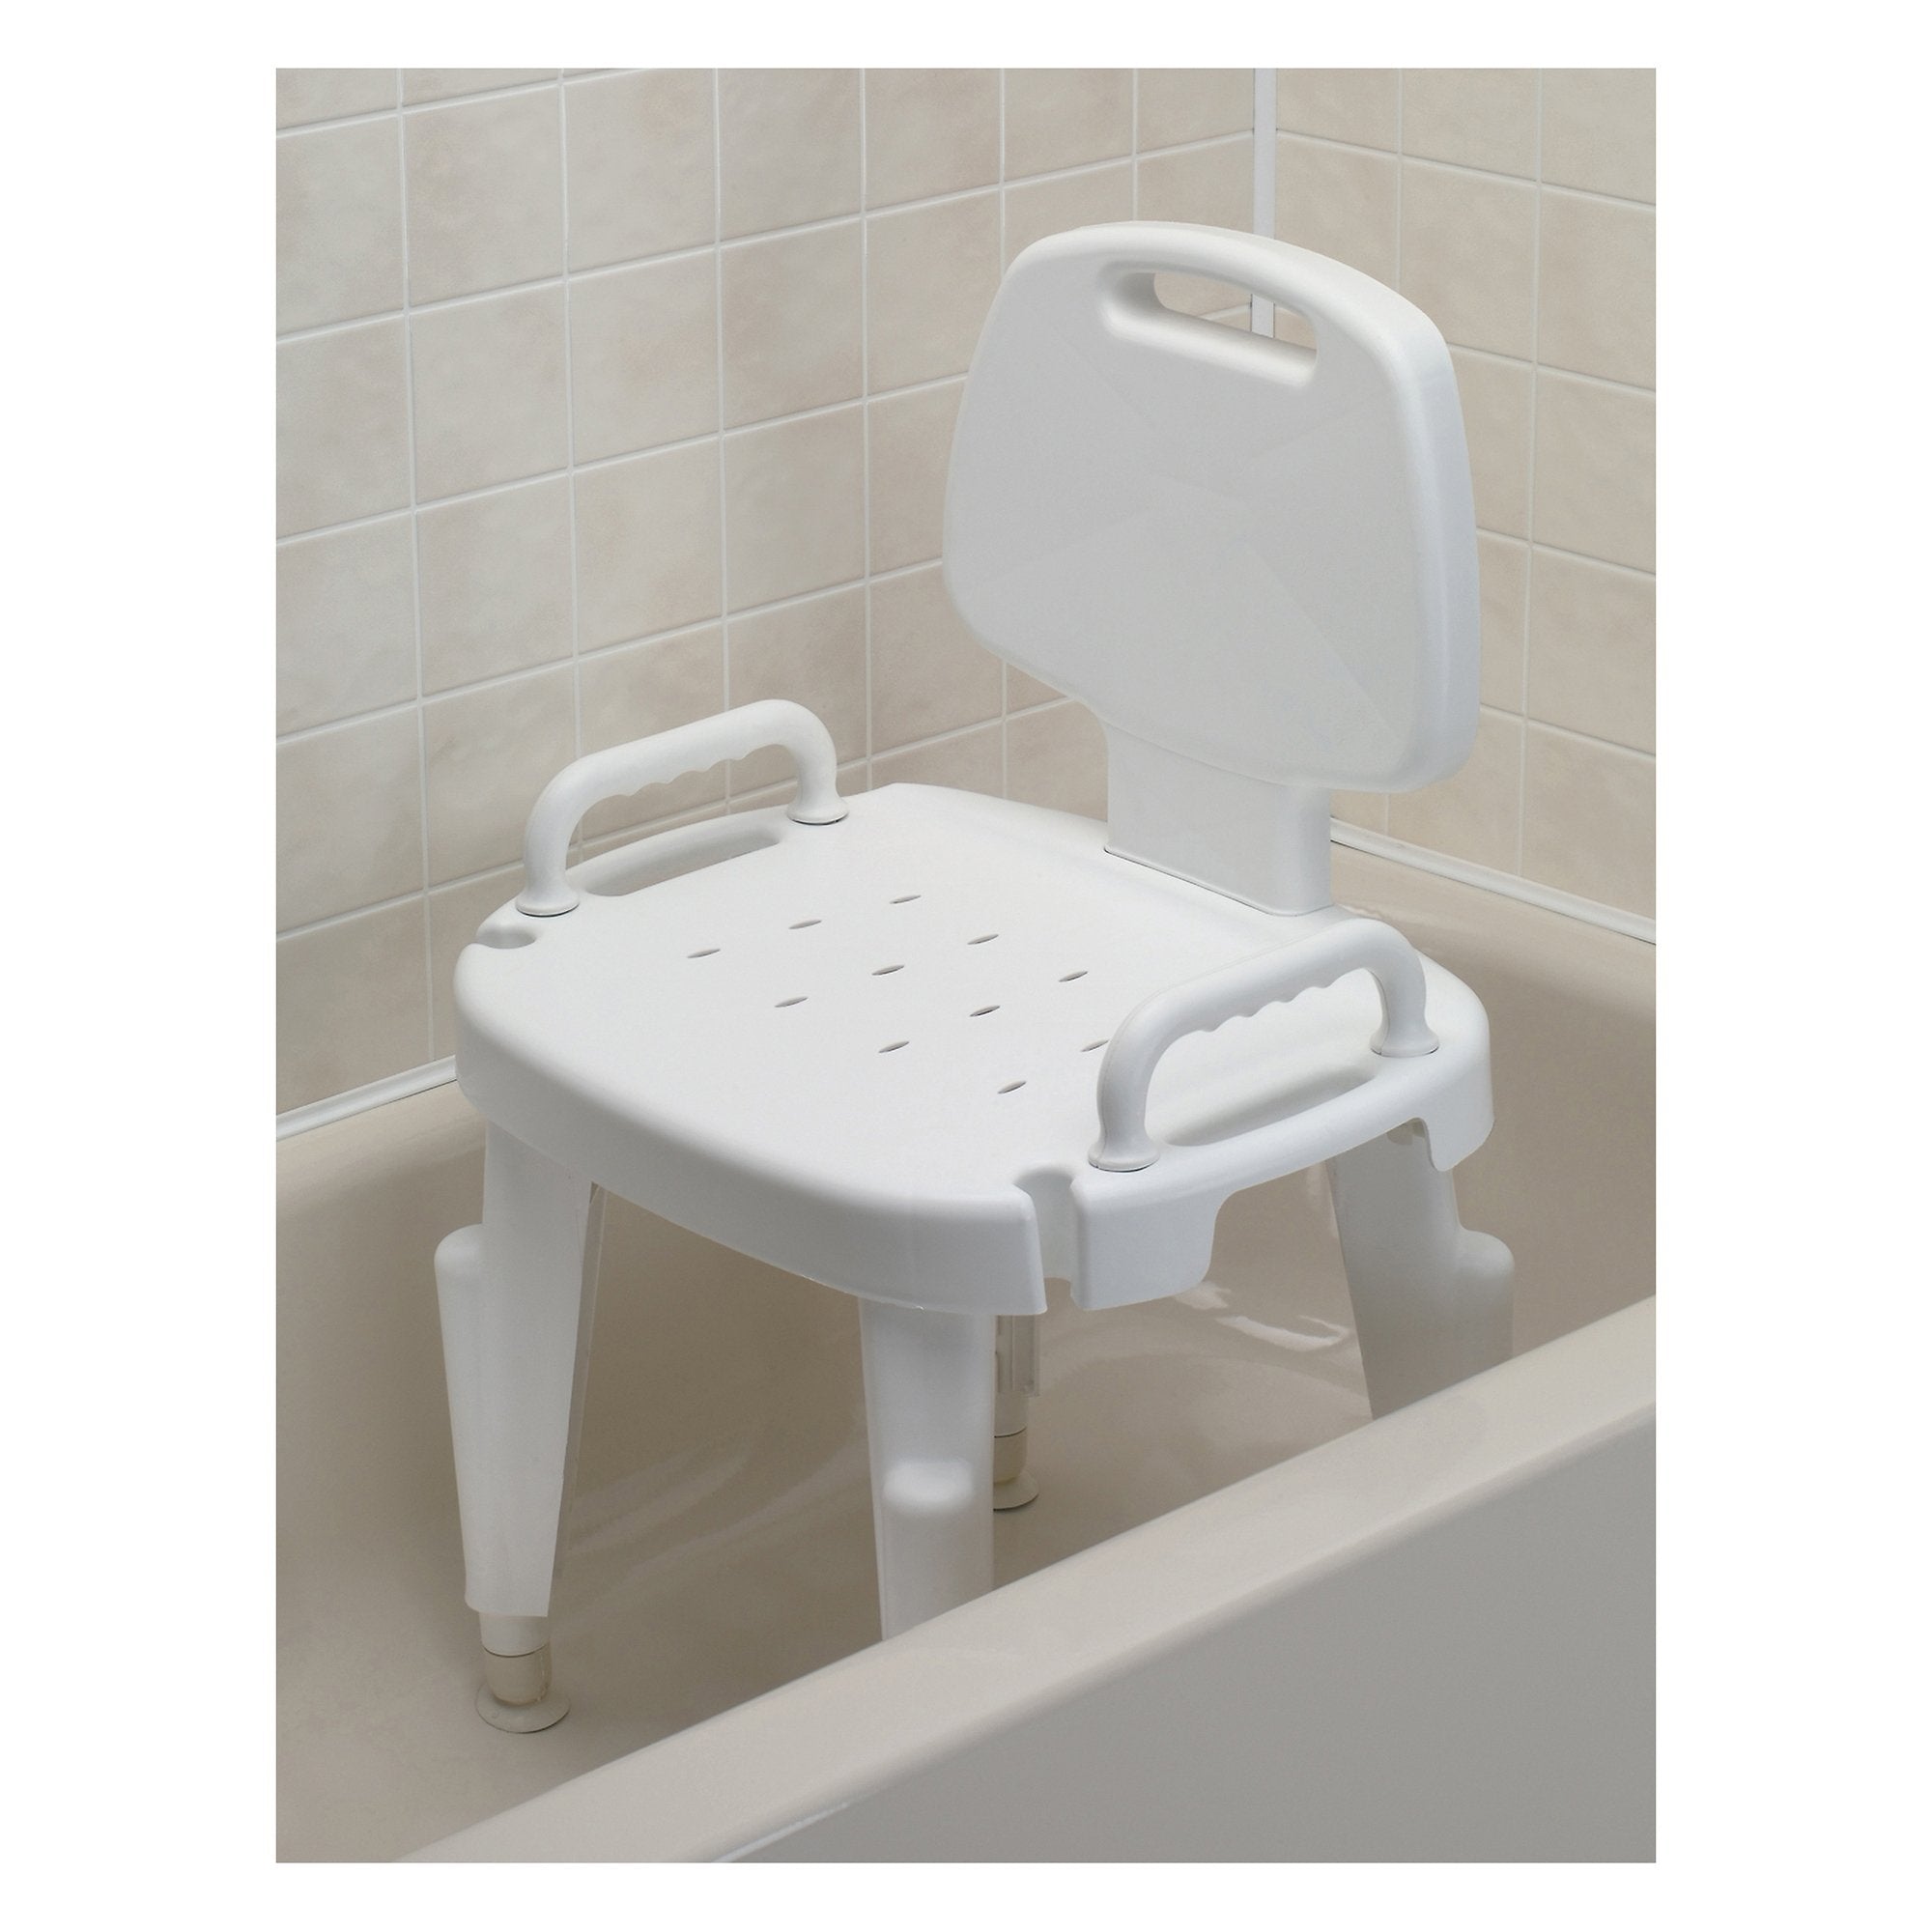 Bath Bench Maddak Removable Arms Plastic Frame With Backrest 17 Inch Seat Width 300 lbs. Weight Capacity